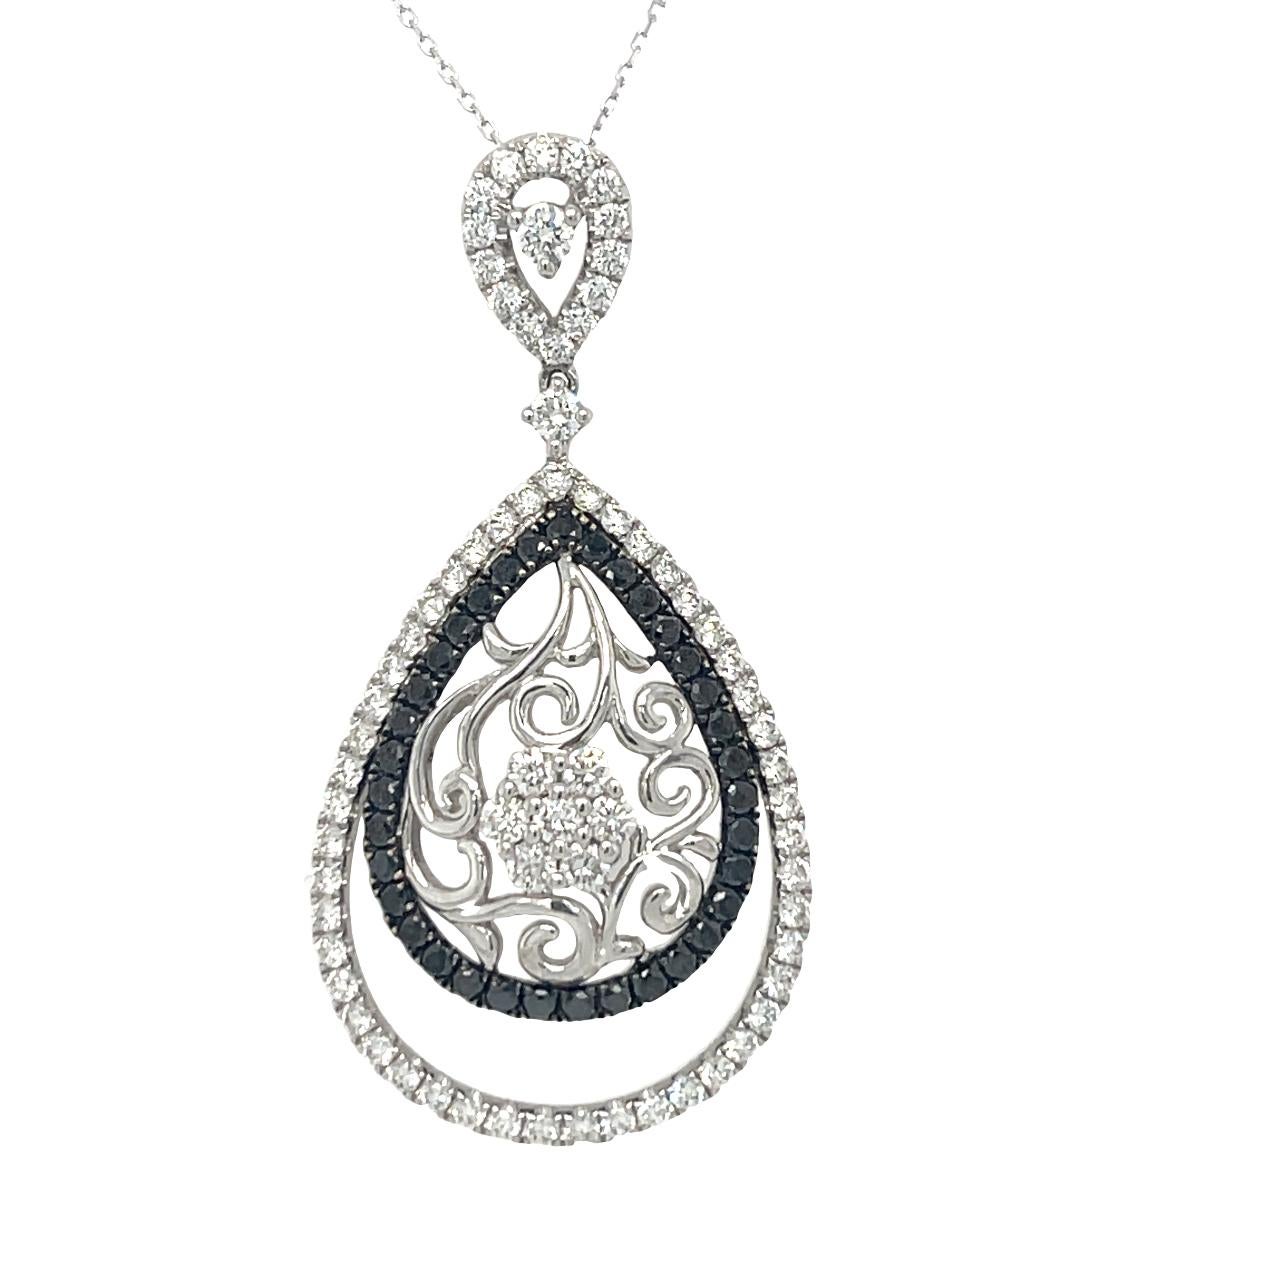 This elegant teardrop pendant has 35 natural black diamonds and 70 brilliant cut white diamonds set in 18K White Gold. White gold chain is included. Pendant has detailed tag attached. This pendant comes in a beautiful box ready for the perfect gift.